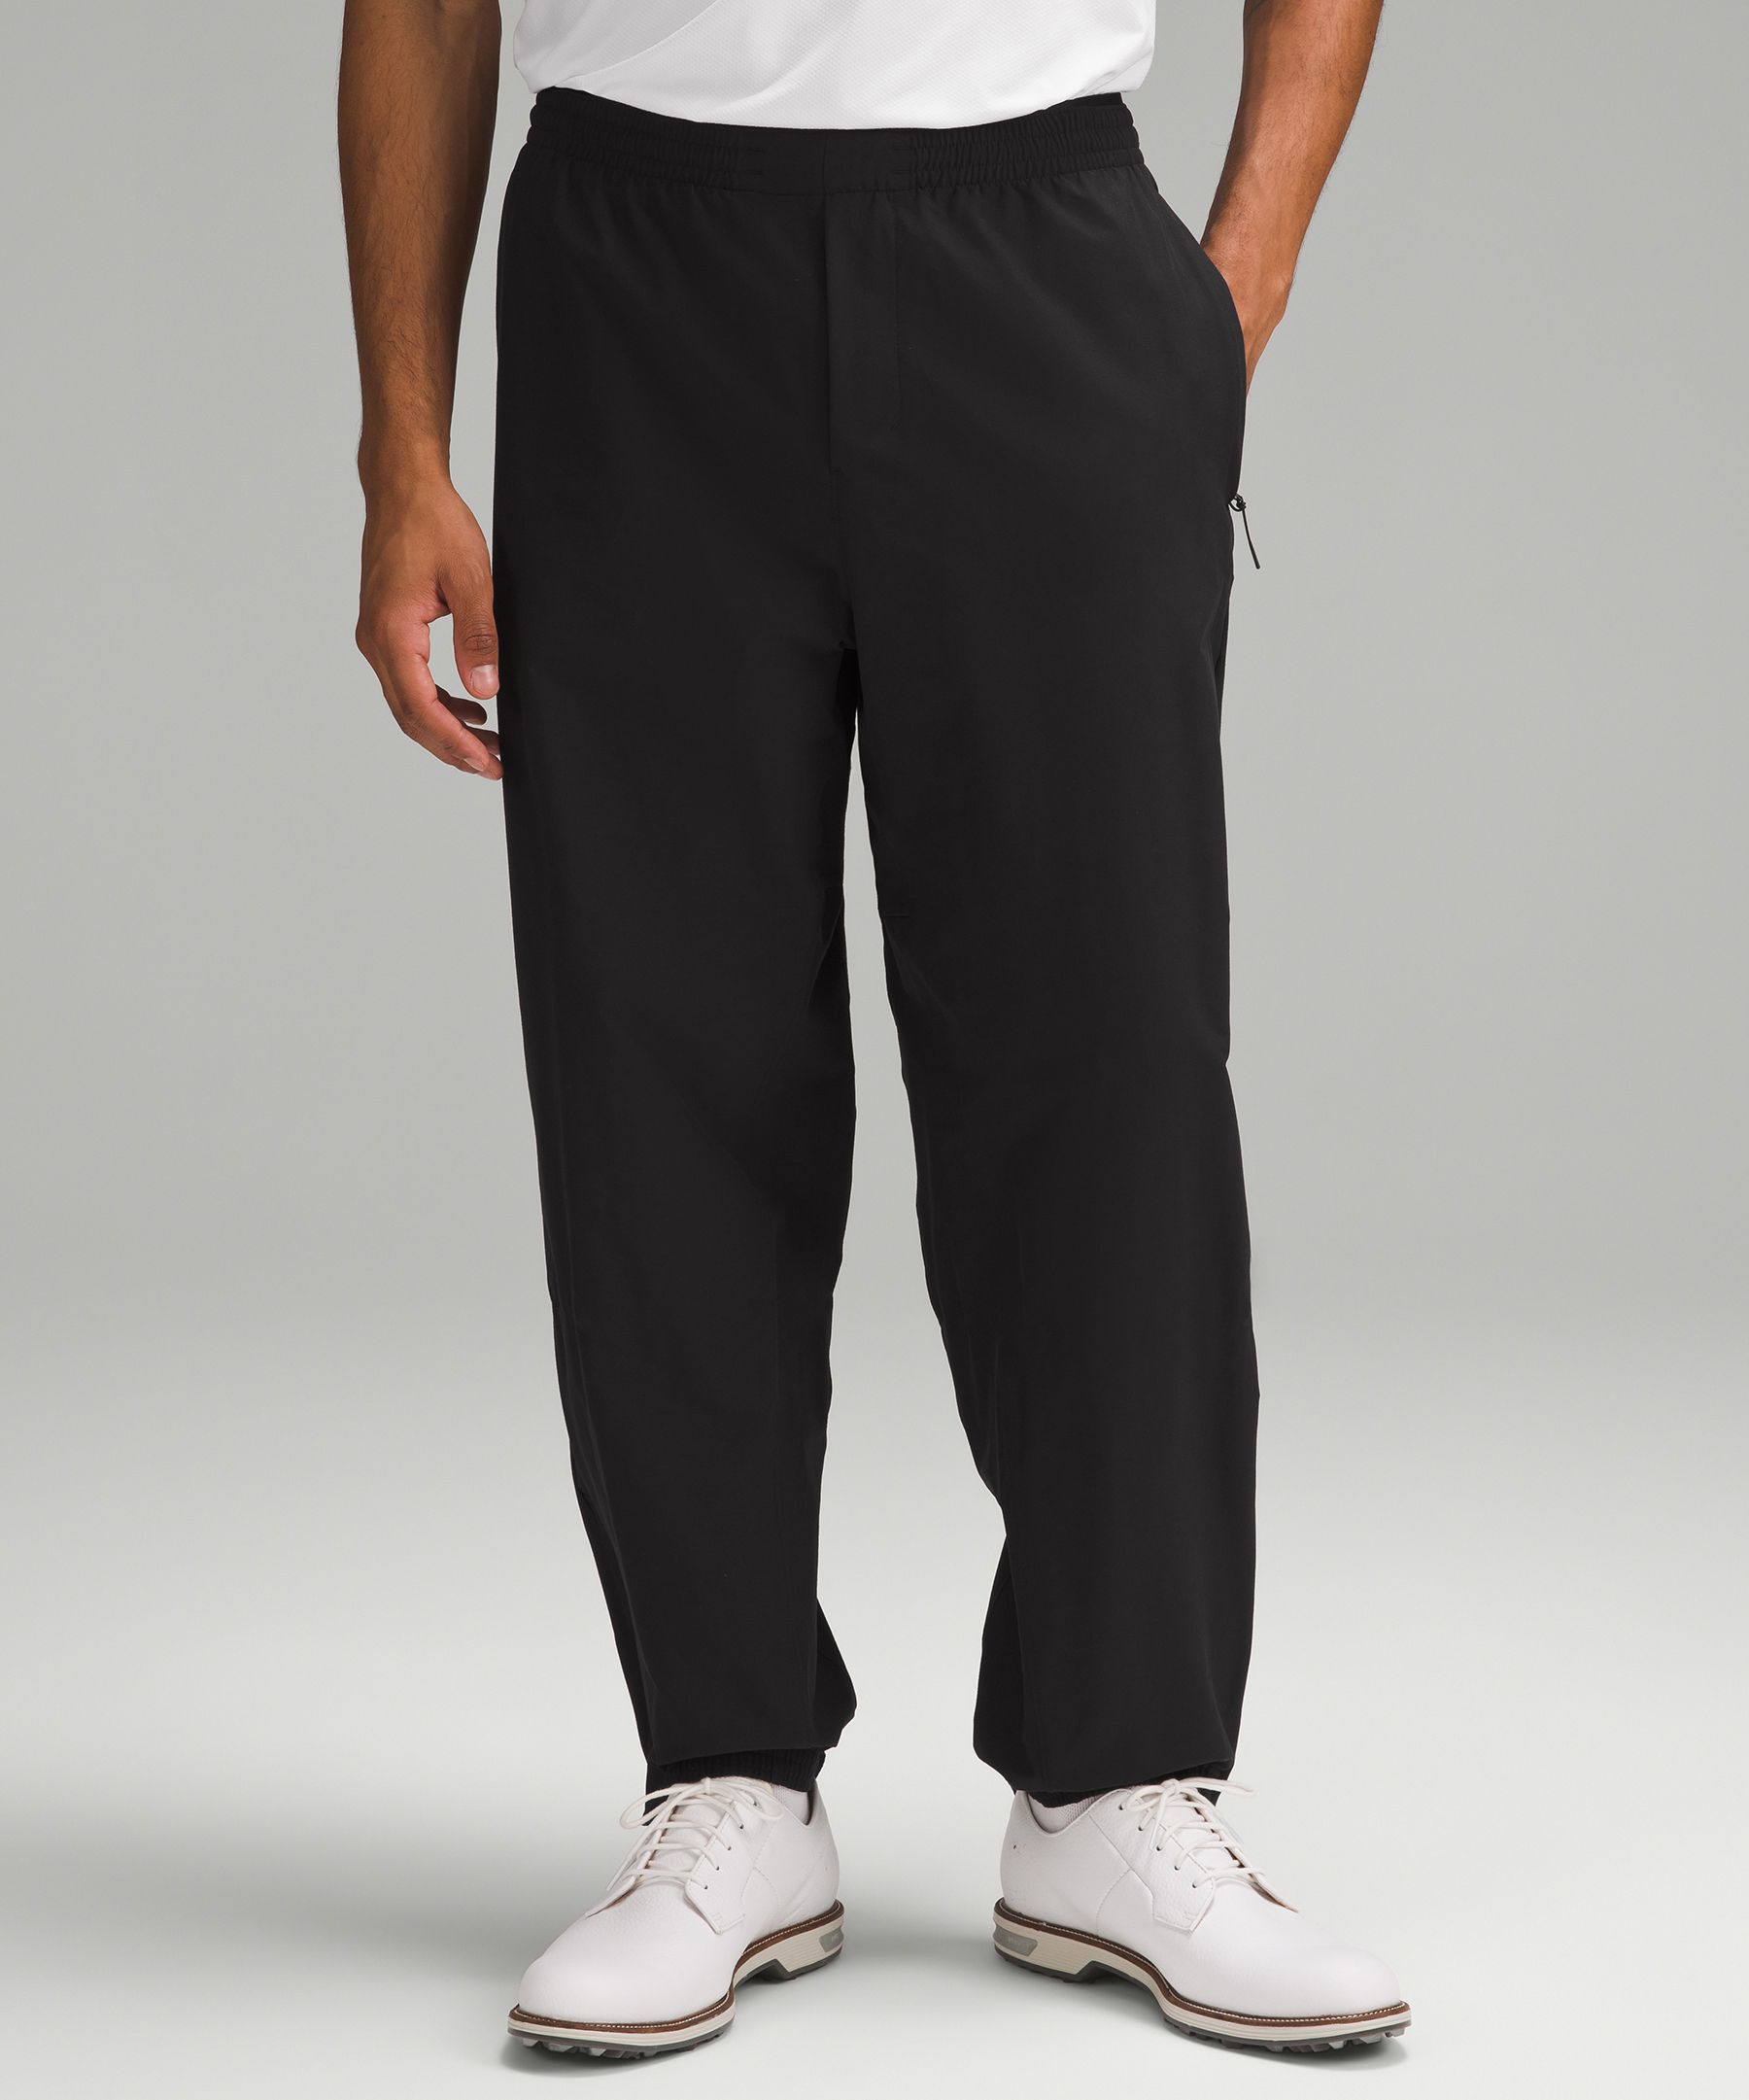 Lululemon athletica Water-Repellent Pull-On Golf Pant, Men's Joggers